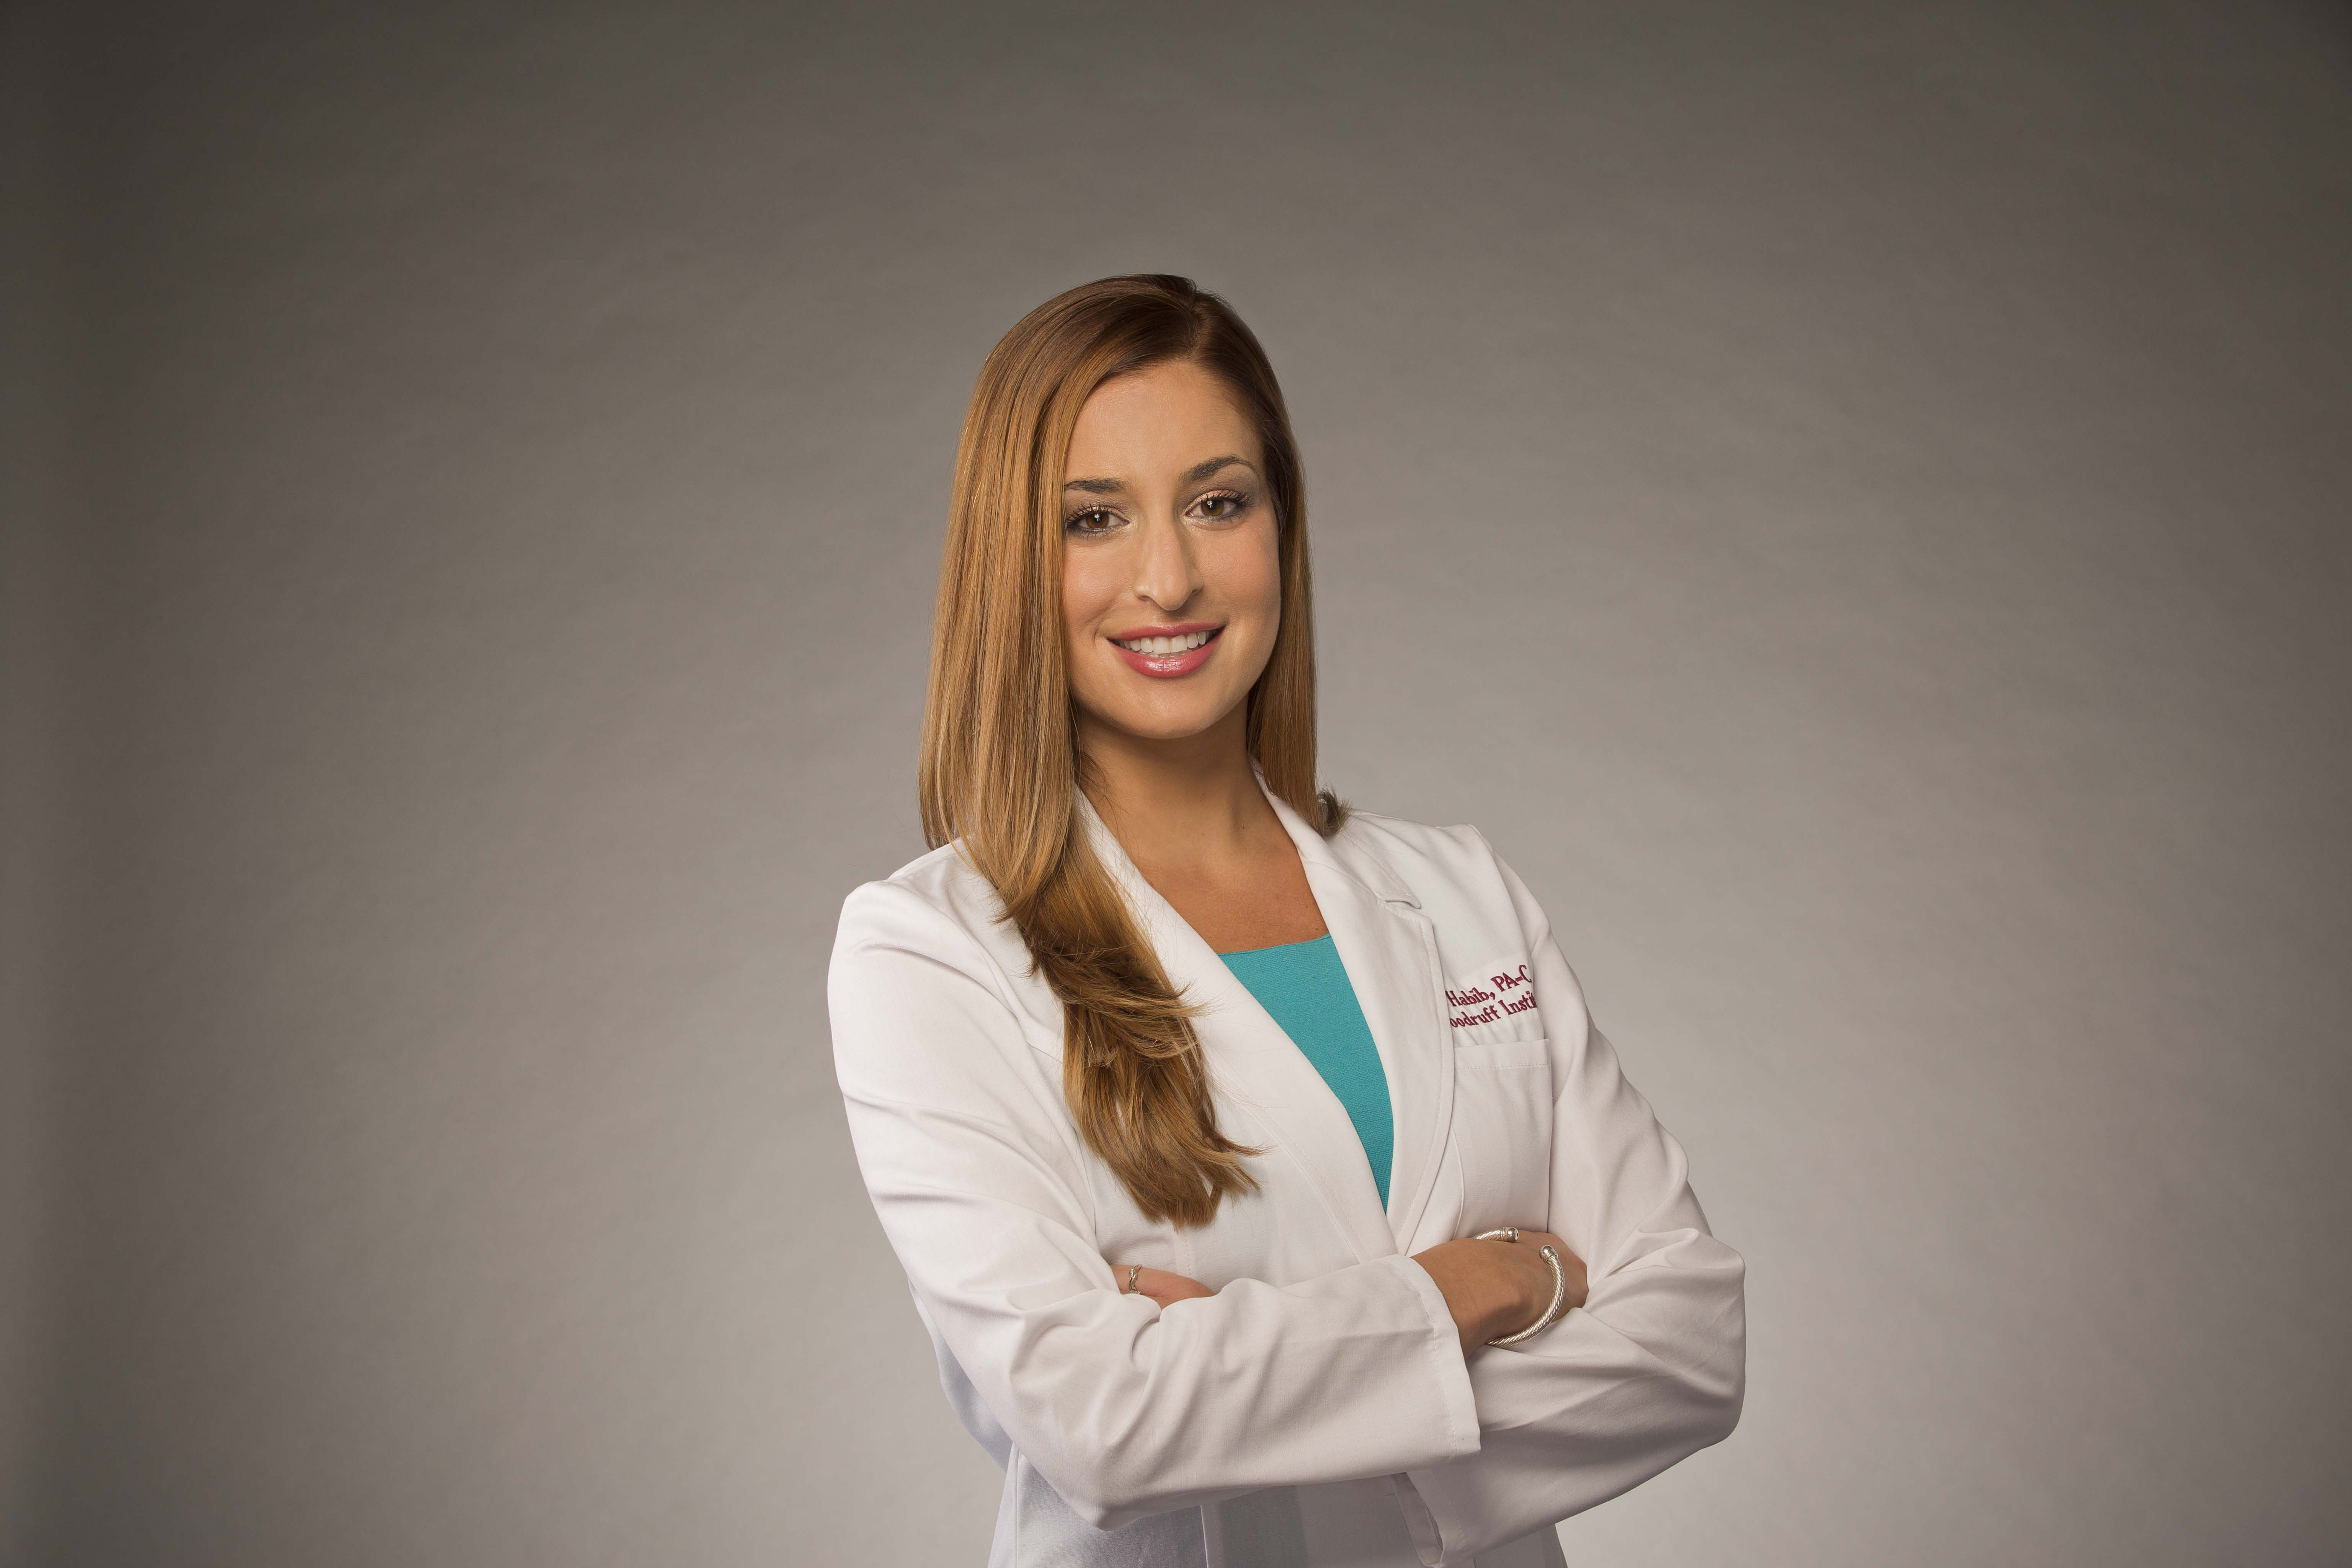 Staff Spotlight: Q&A with Nicole Habib, Physician Assistant